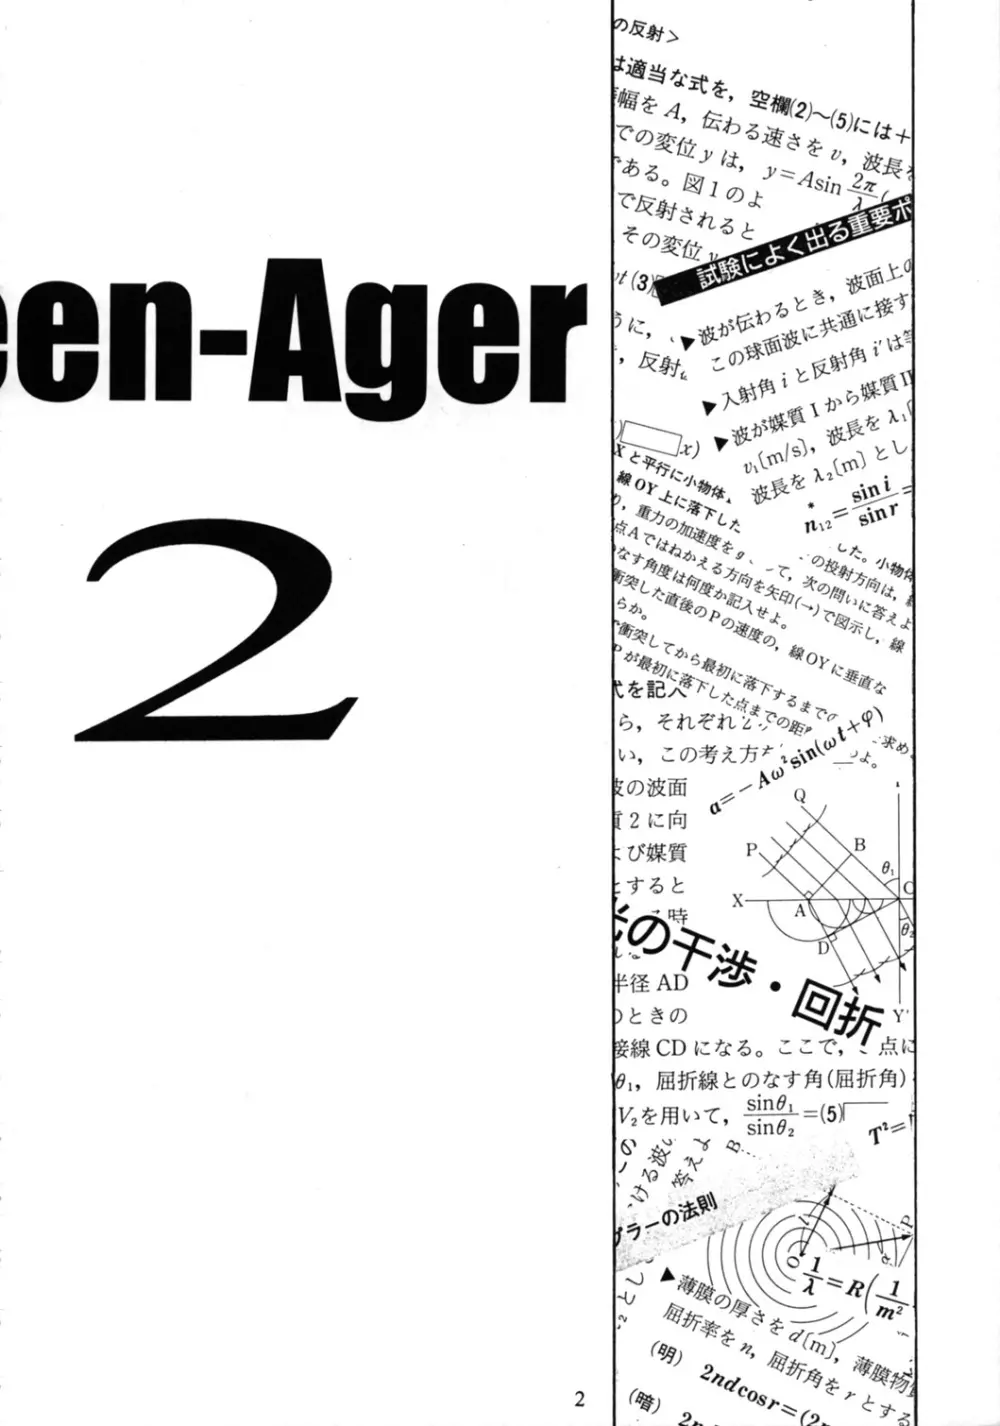 Teen-Ager 2 3ページ